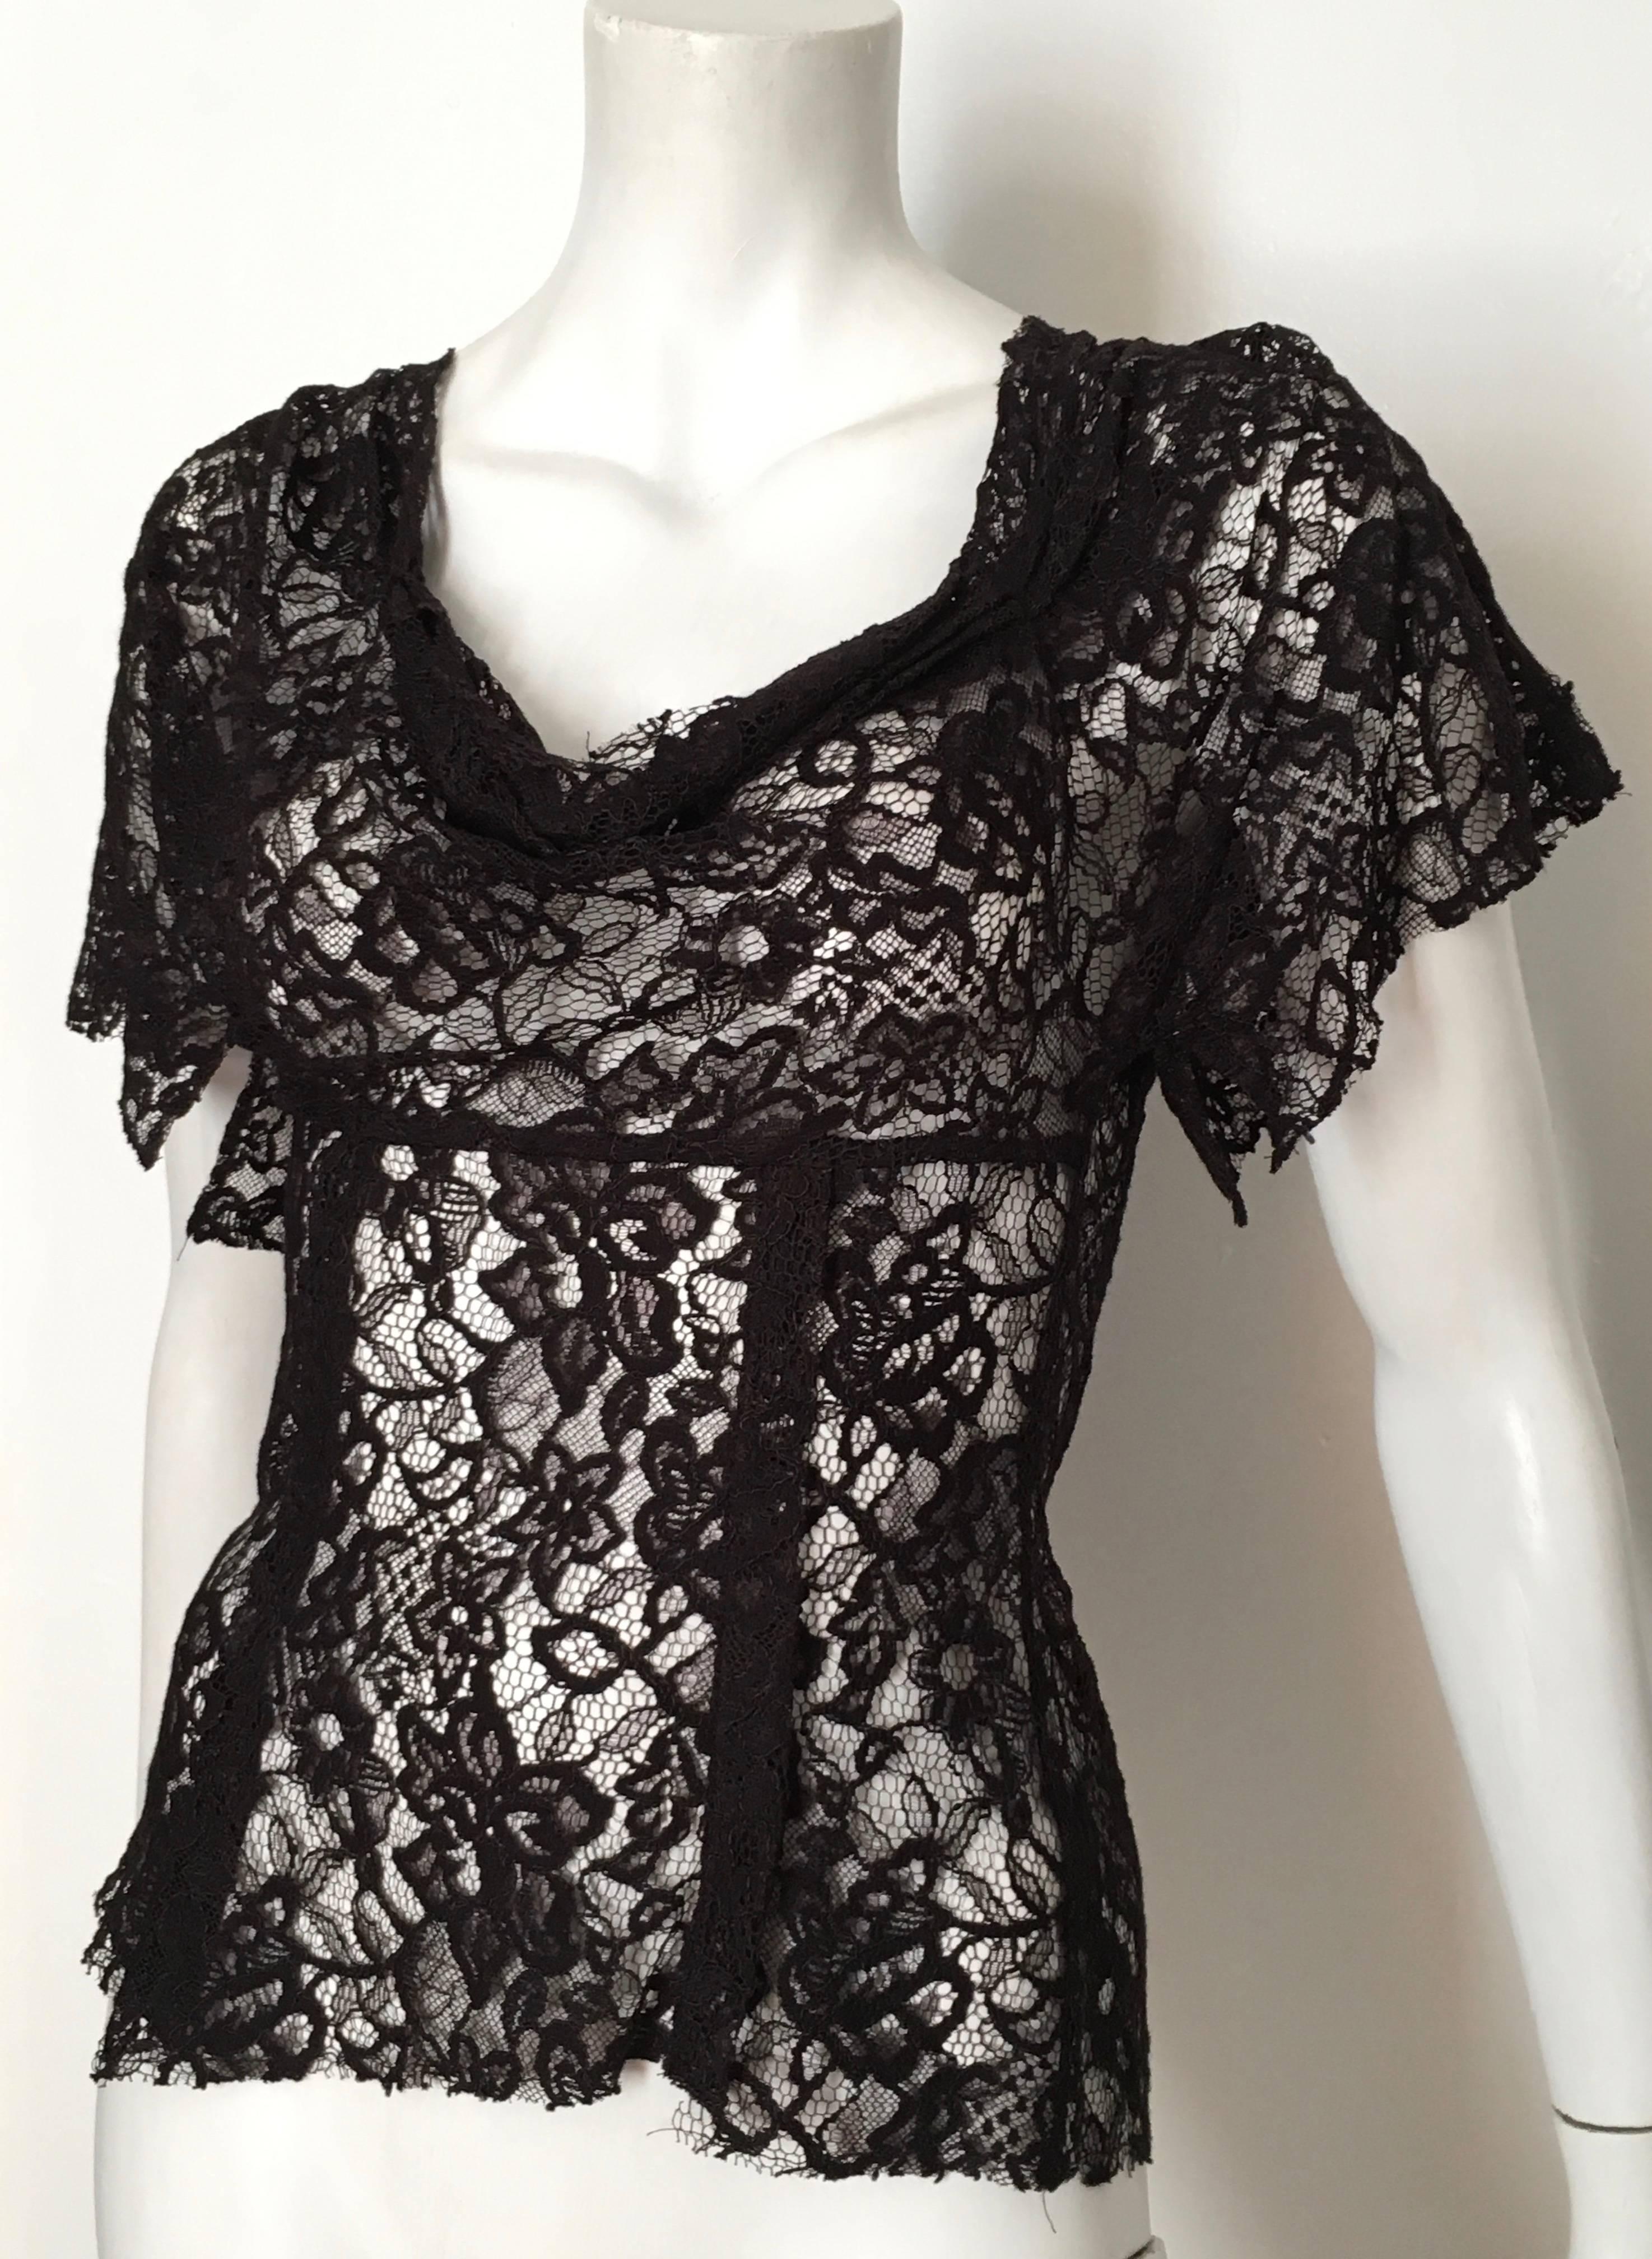 Alexander McQueen black lace top fits an USA size 4.
Sexy black lace top will look amazing with your vintage YSL black tuxedo pants or your Thierry Mugler skirt. Made in Italy.  Zipper in back of top. 
Measurements are:
29" bust 74cm
27"